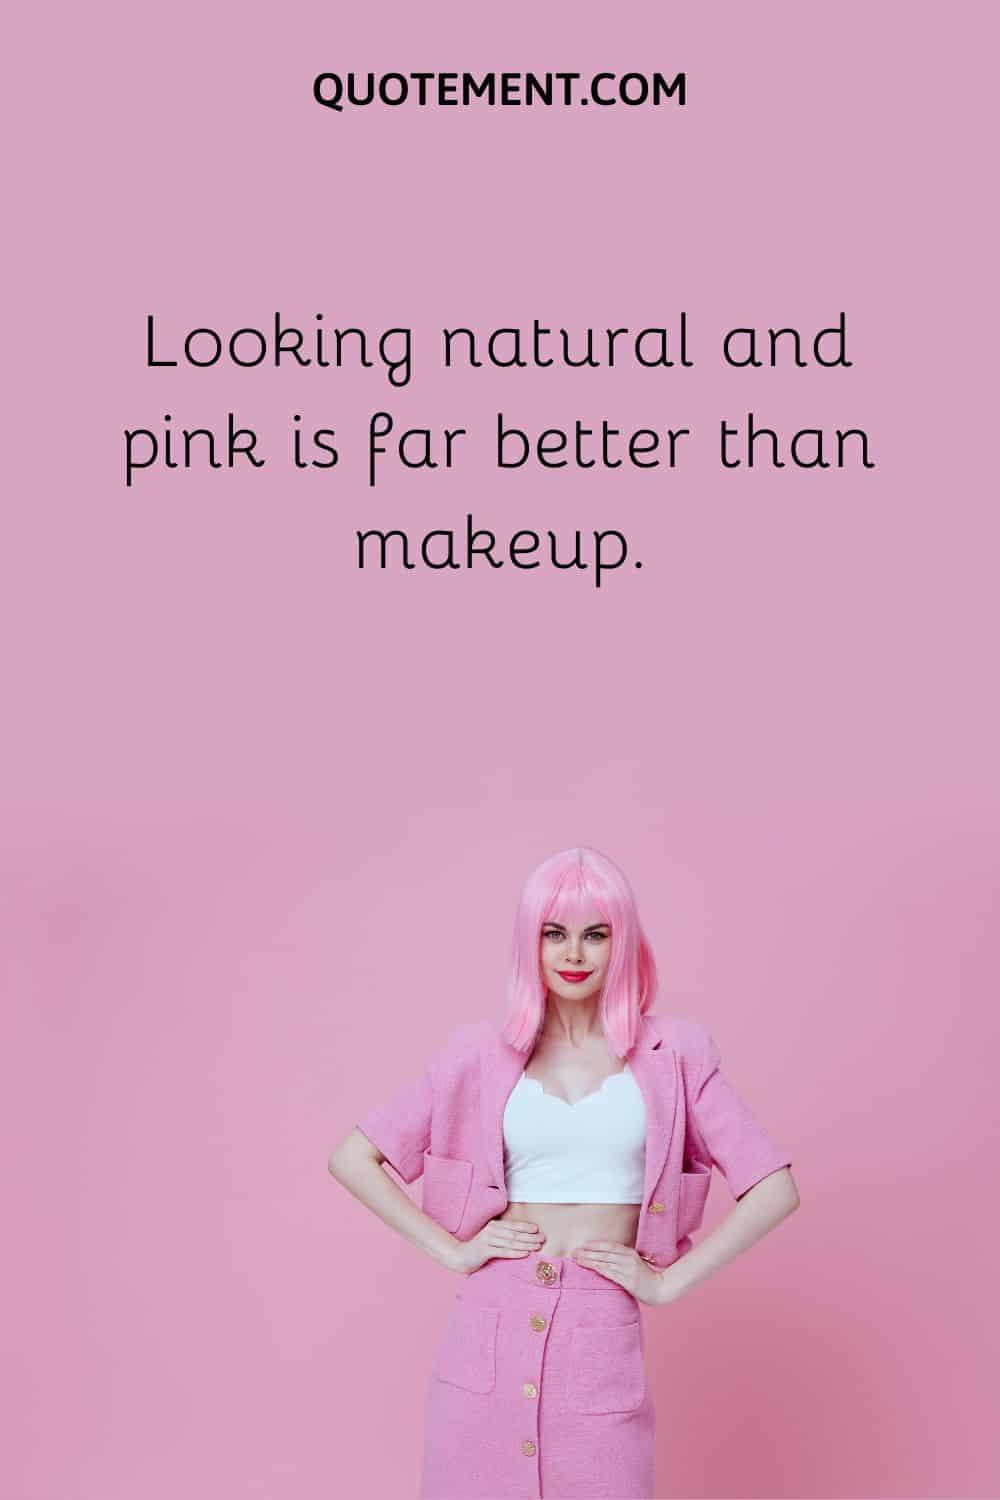  Looking natural and pink is far better than makeup.
